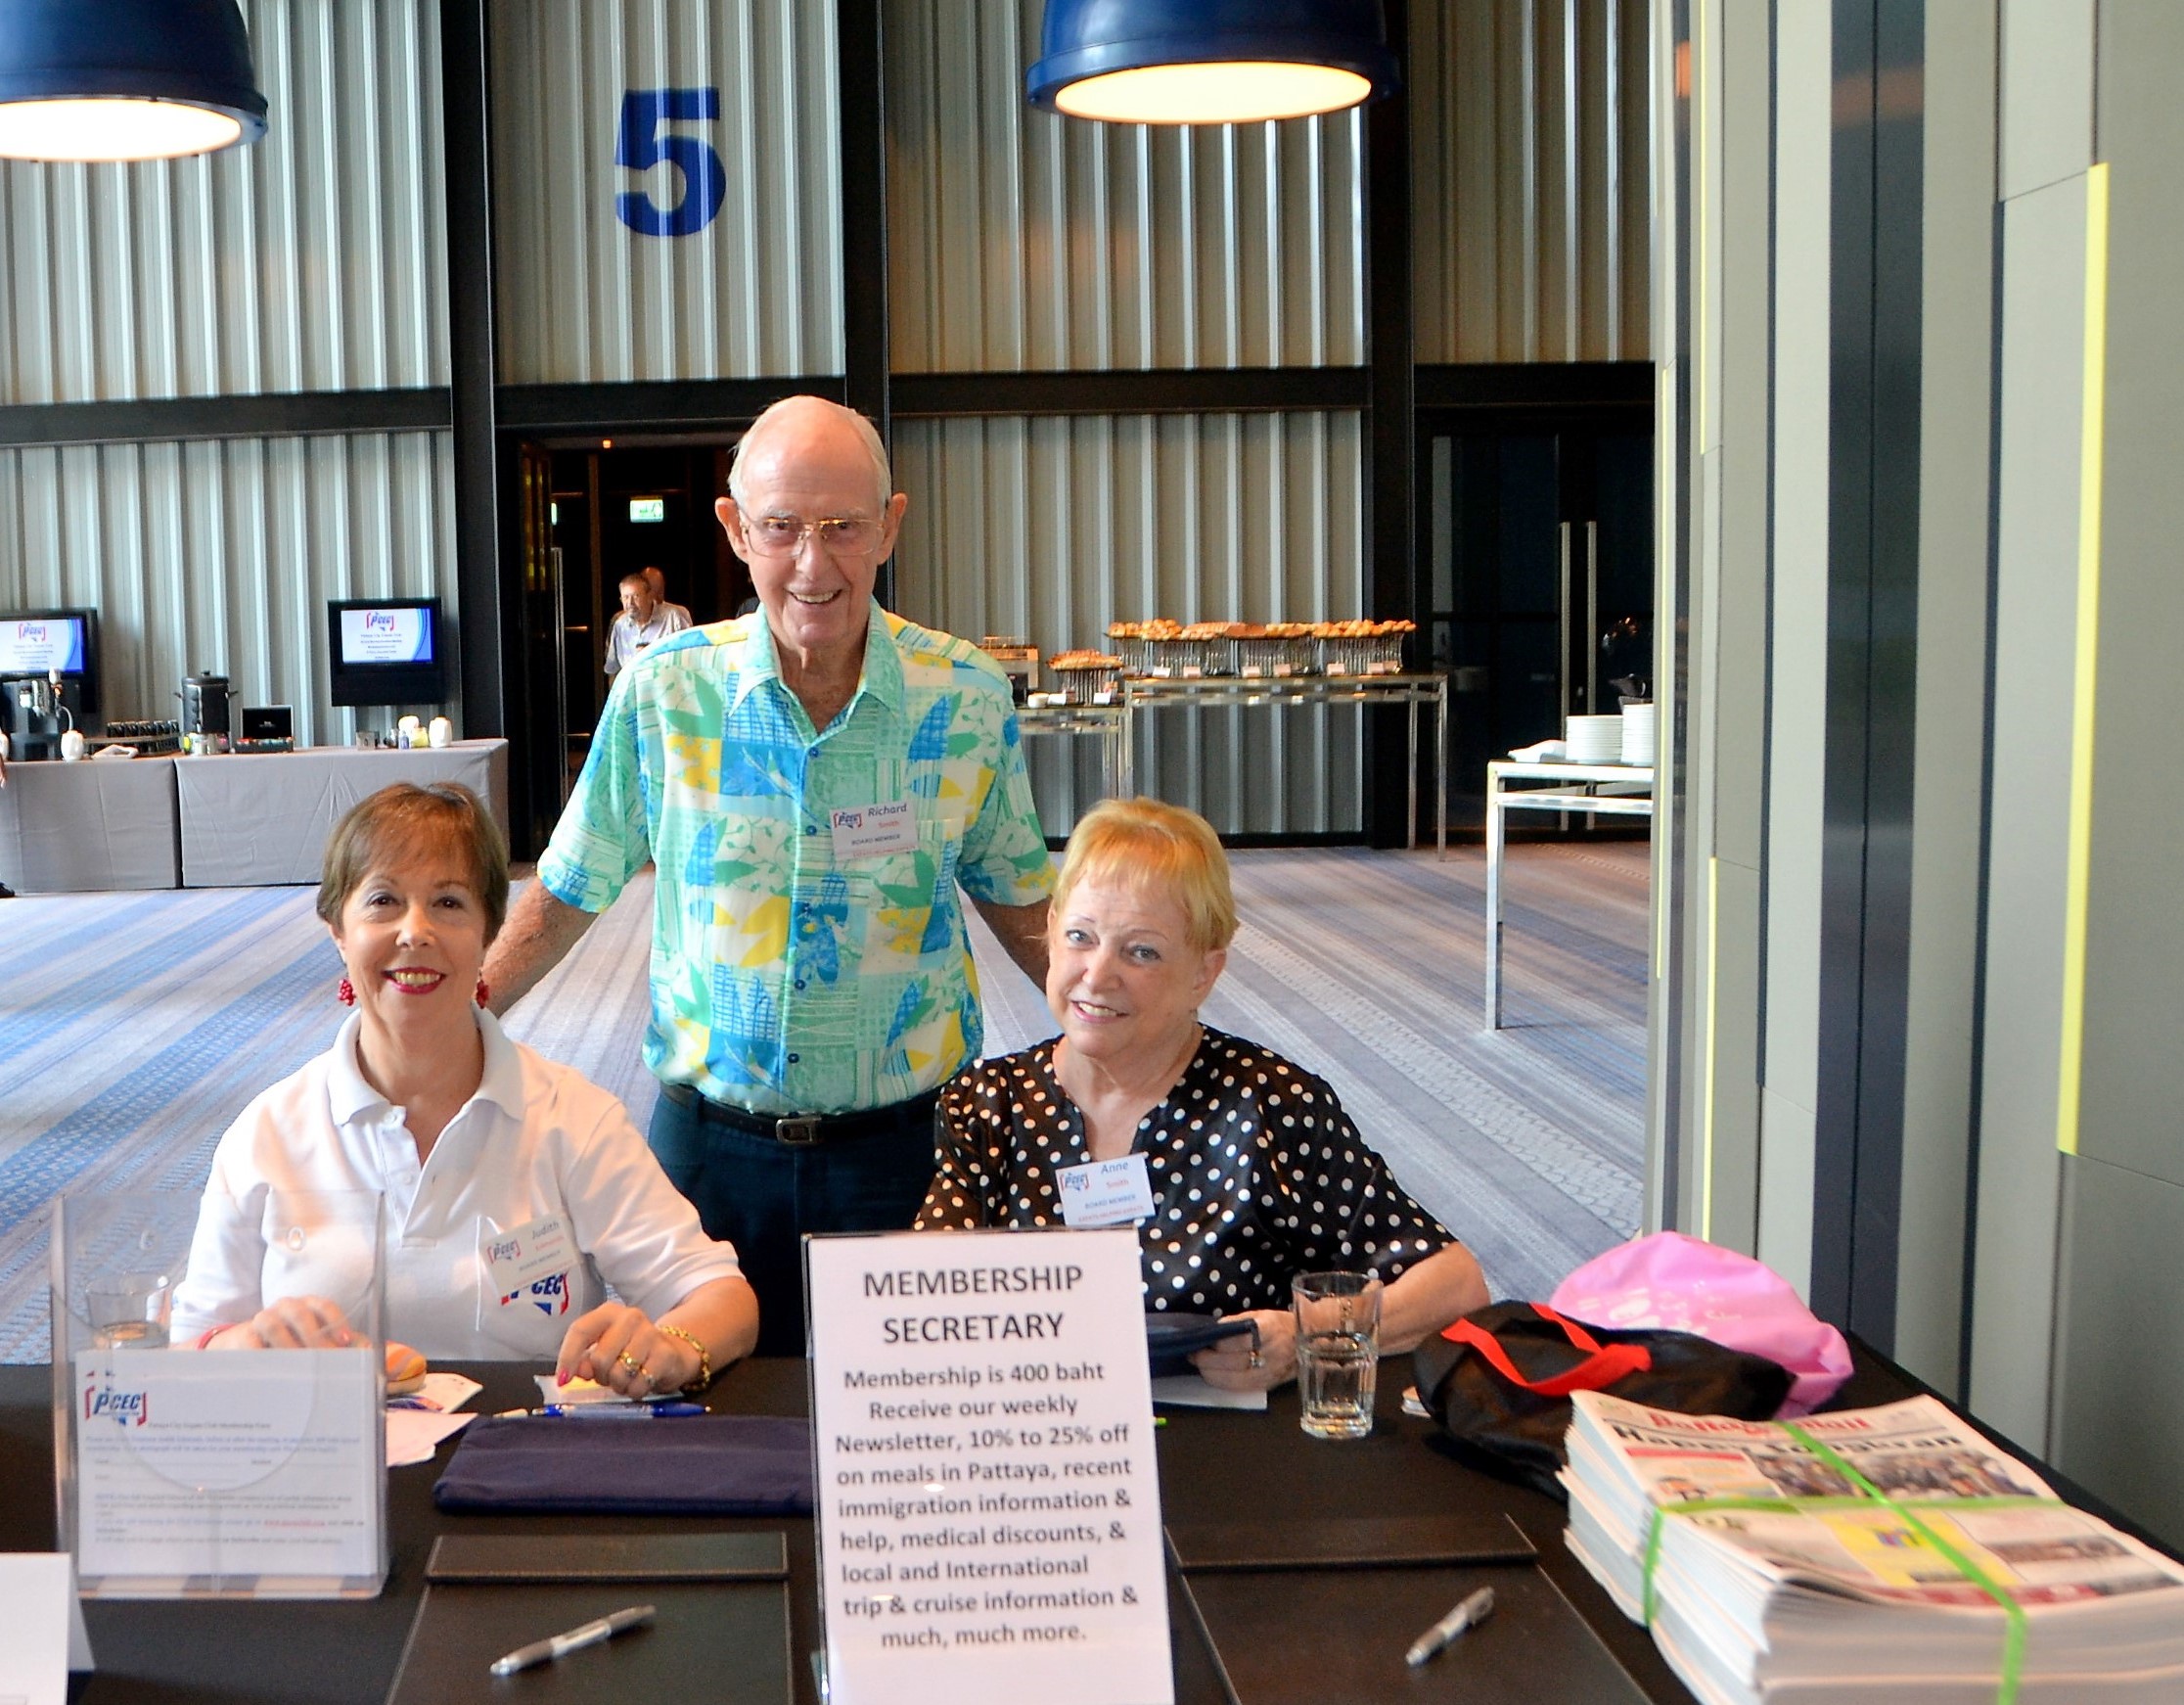 Judith Edmonds with the able assistance of Anne Smith are on hand to take membership applications before the PCEC Sunday meeting program starts. Here they pose for the camera with Vice Chairman Richard Smith; also, on the desk are copies of the Pattaya Mail available free for members and guests.